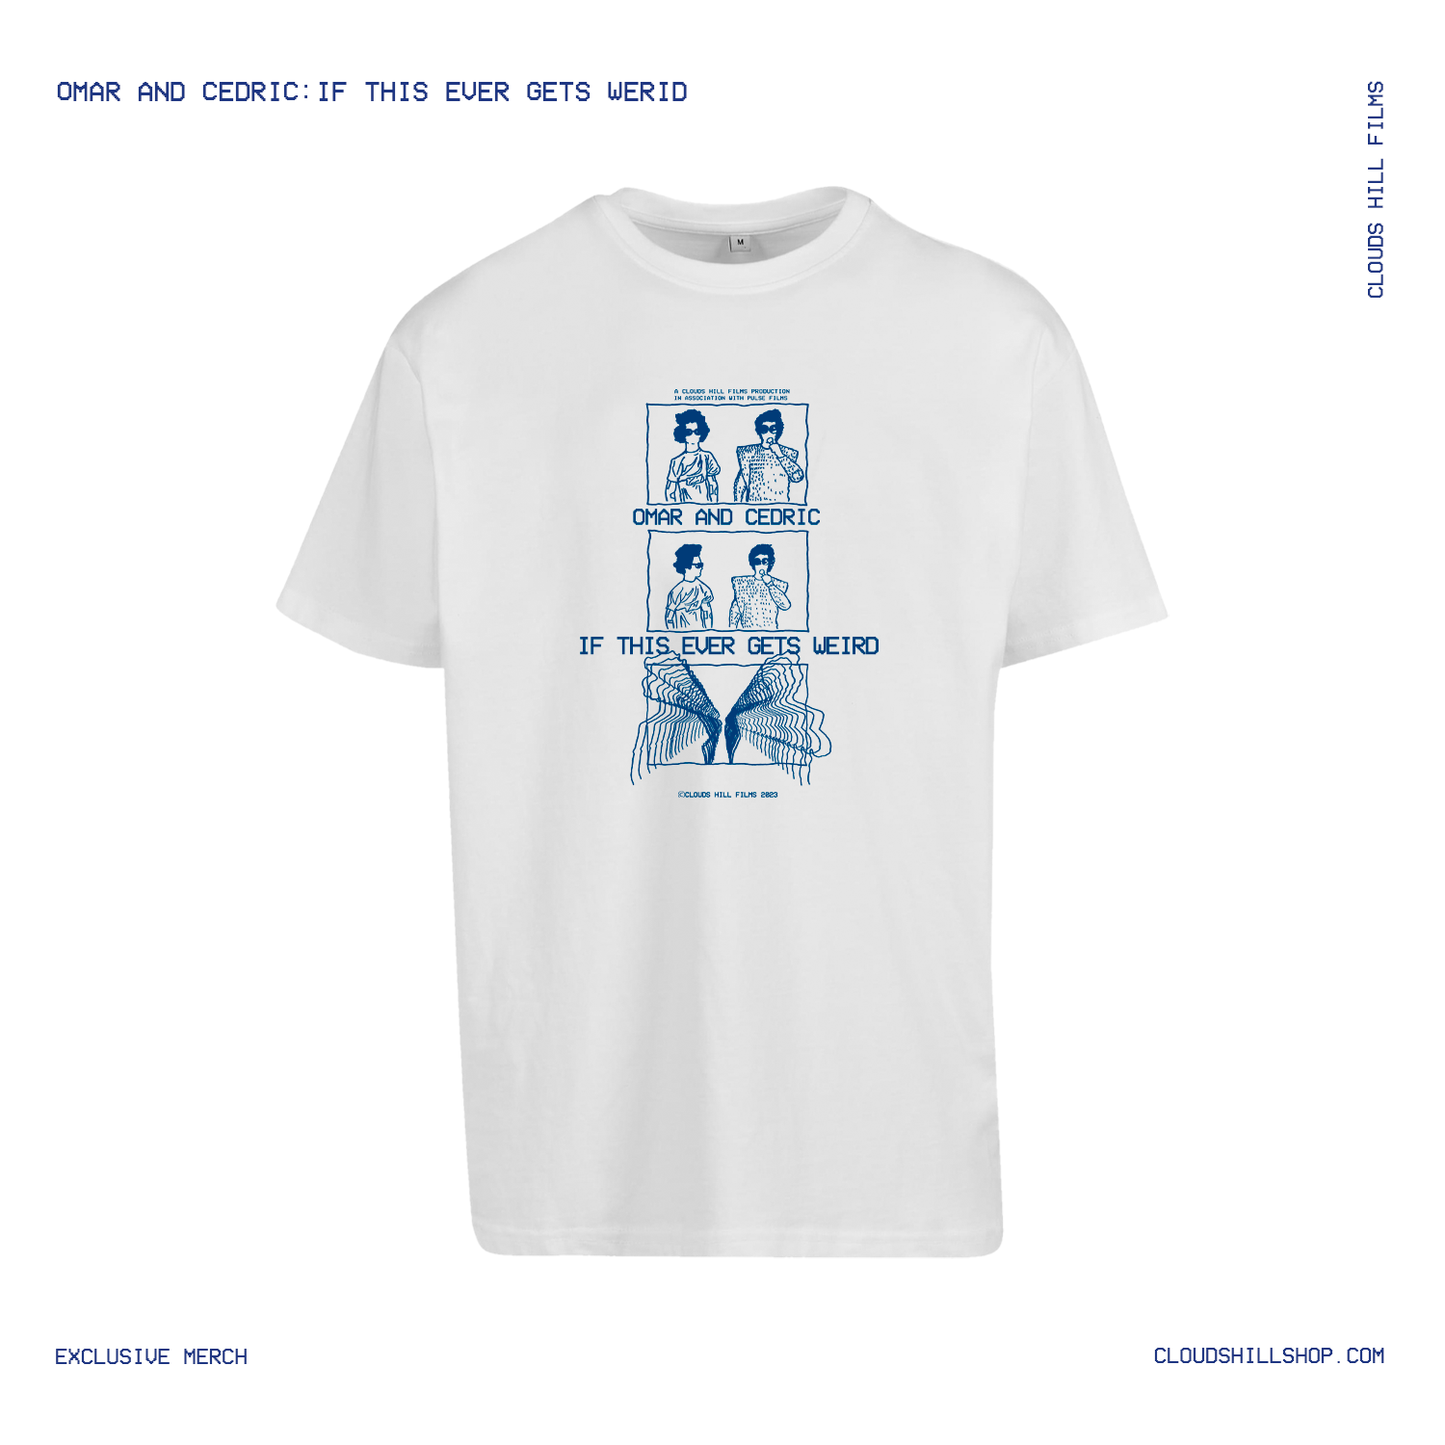 Omar and Cedric - If This Ever Gets Weird White T-Shirt